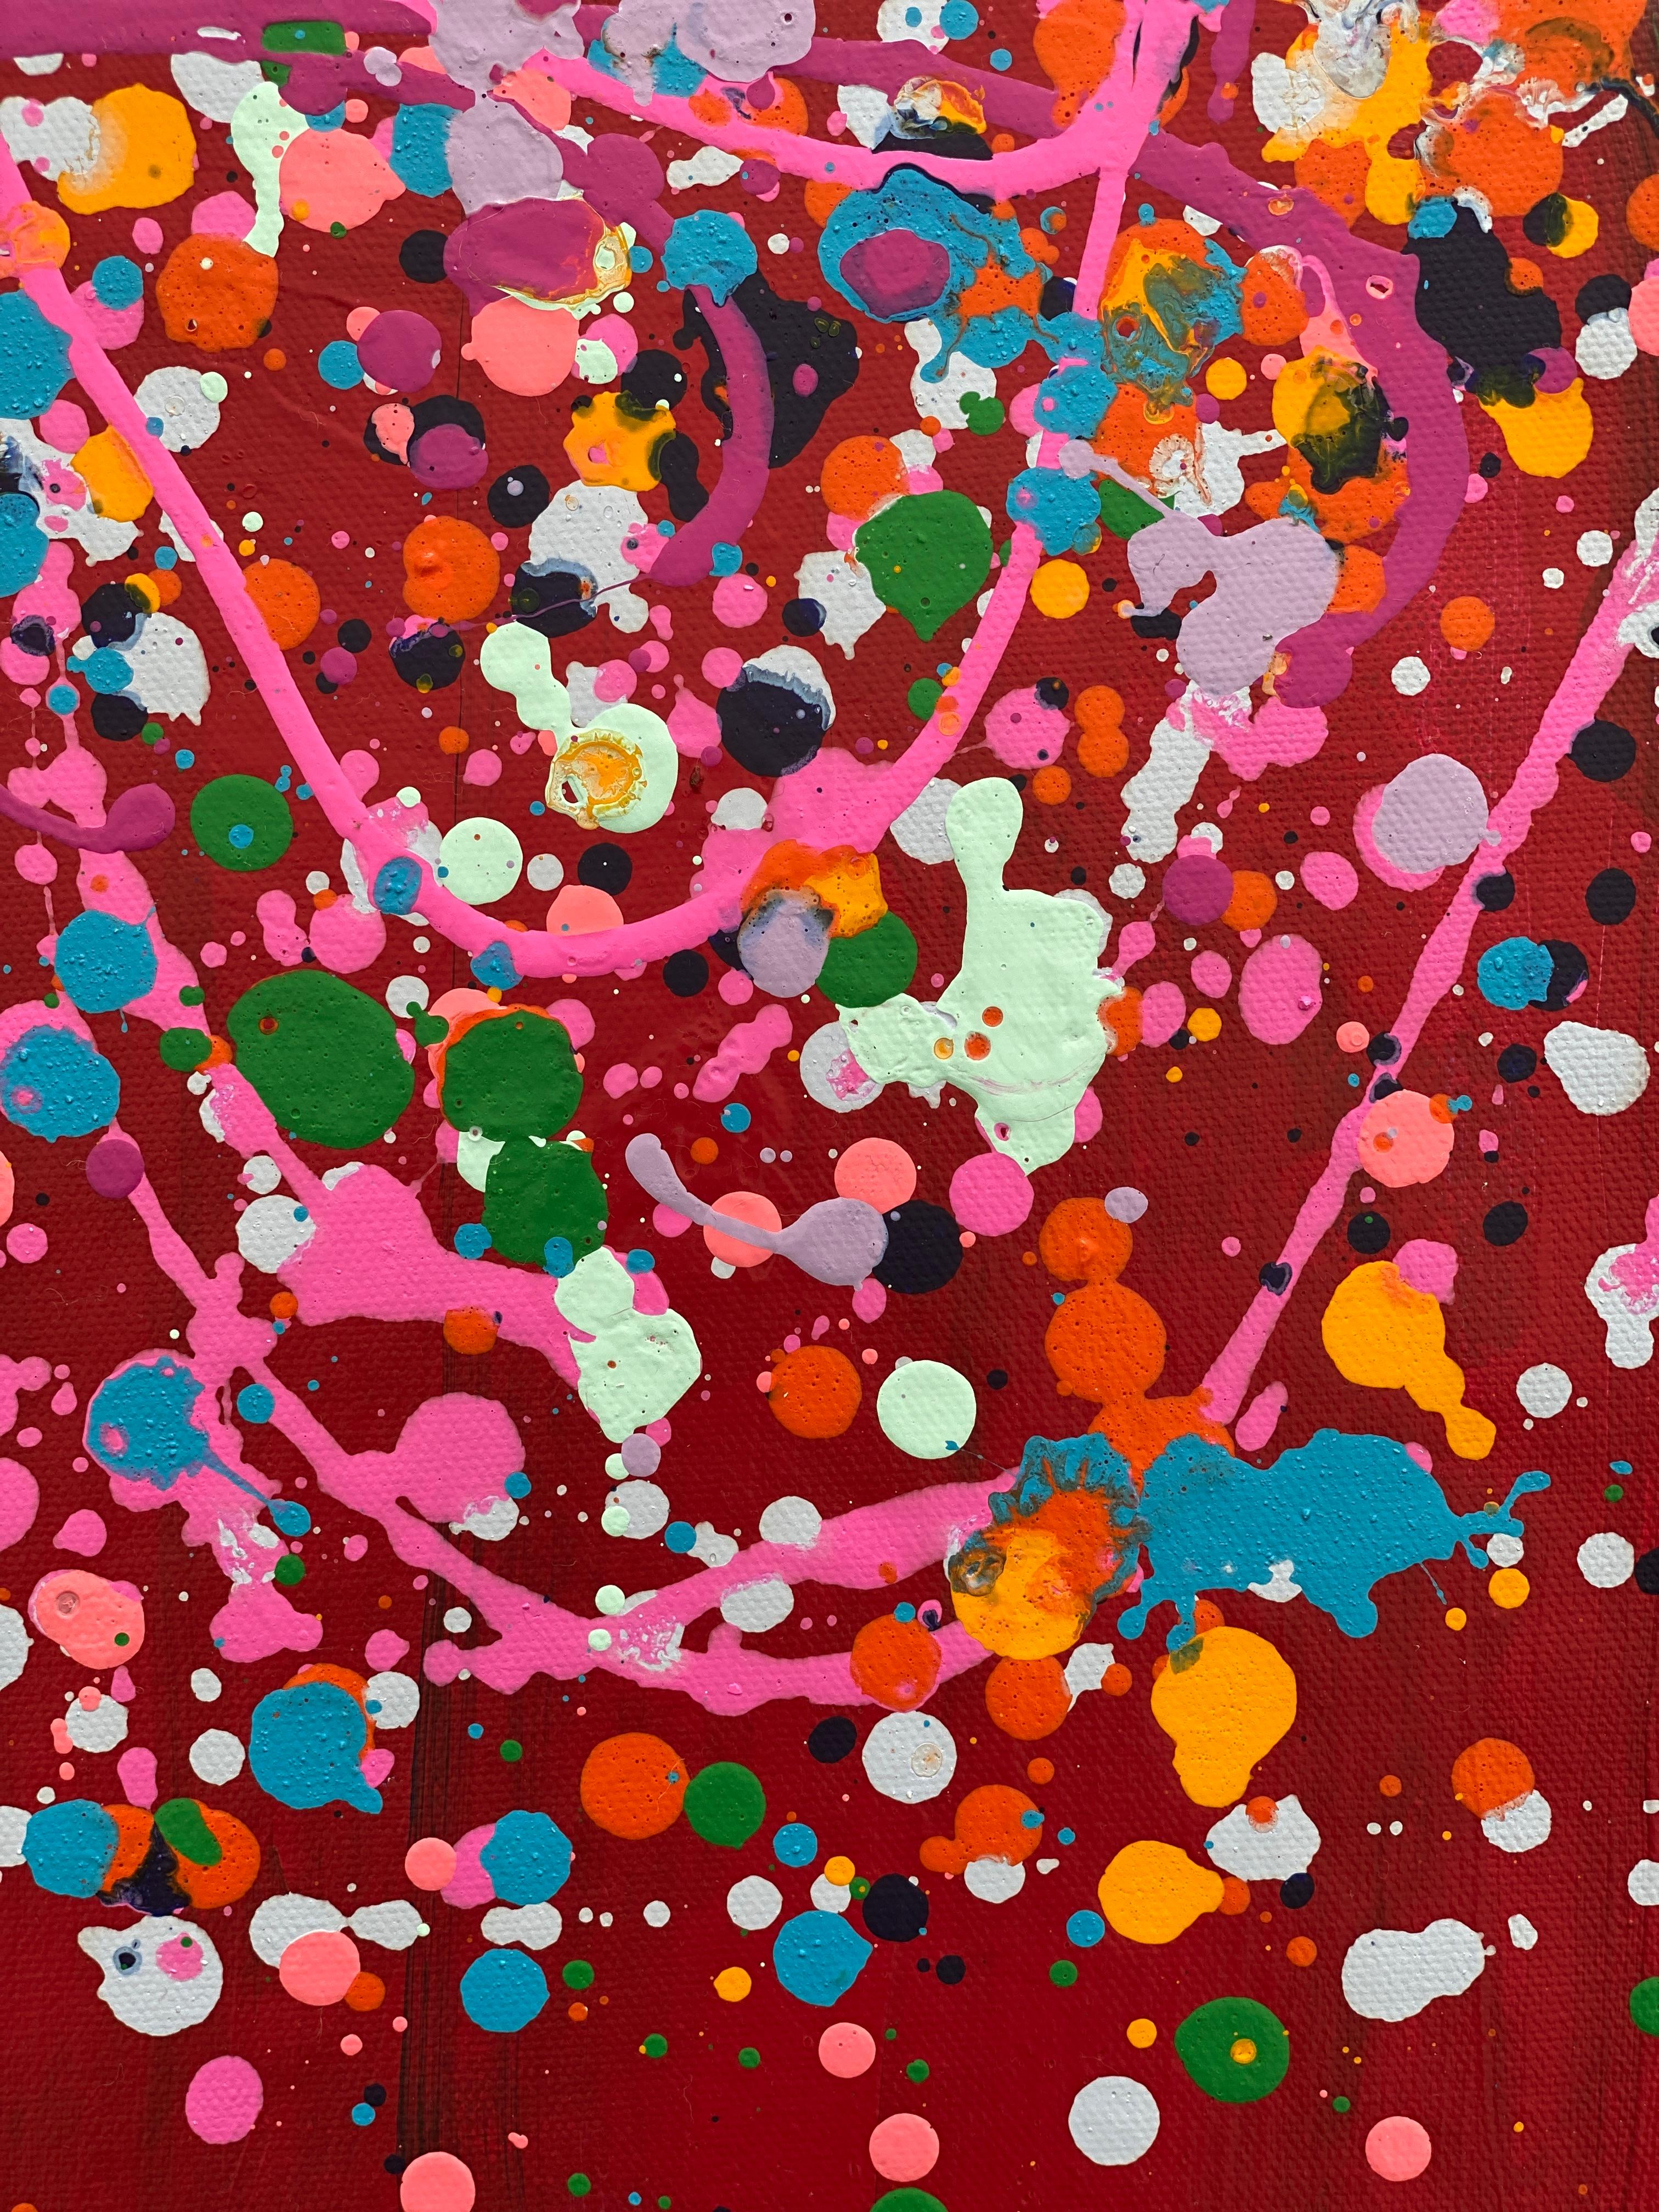 Colorful spatter no8 drip abstract expressionist Jackson Pollock red pink green 1